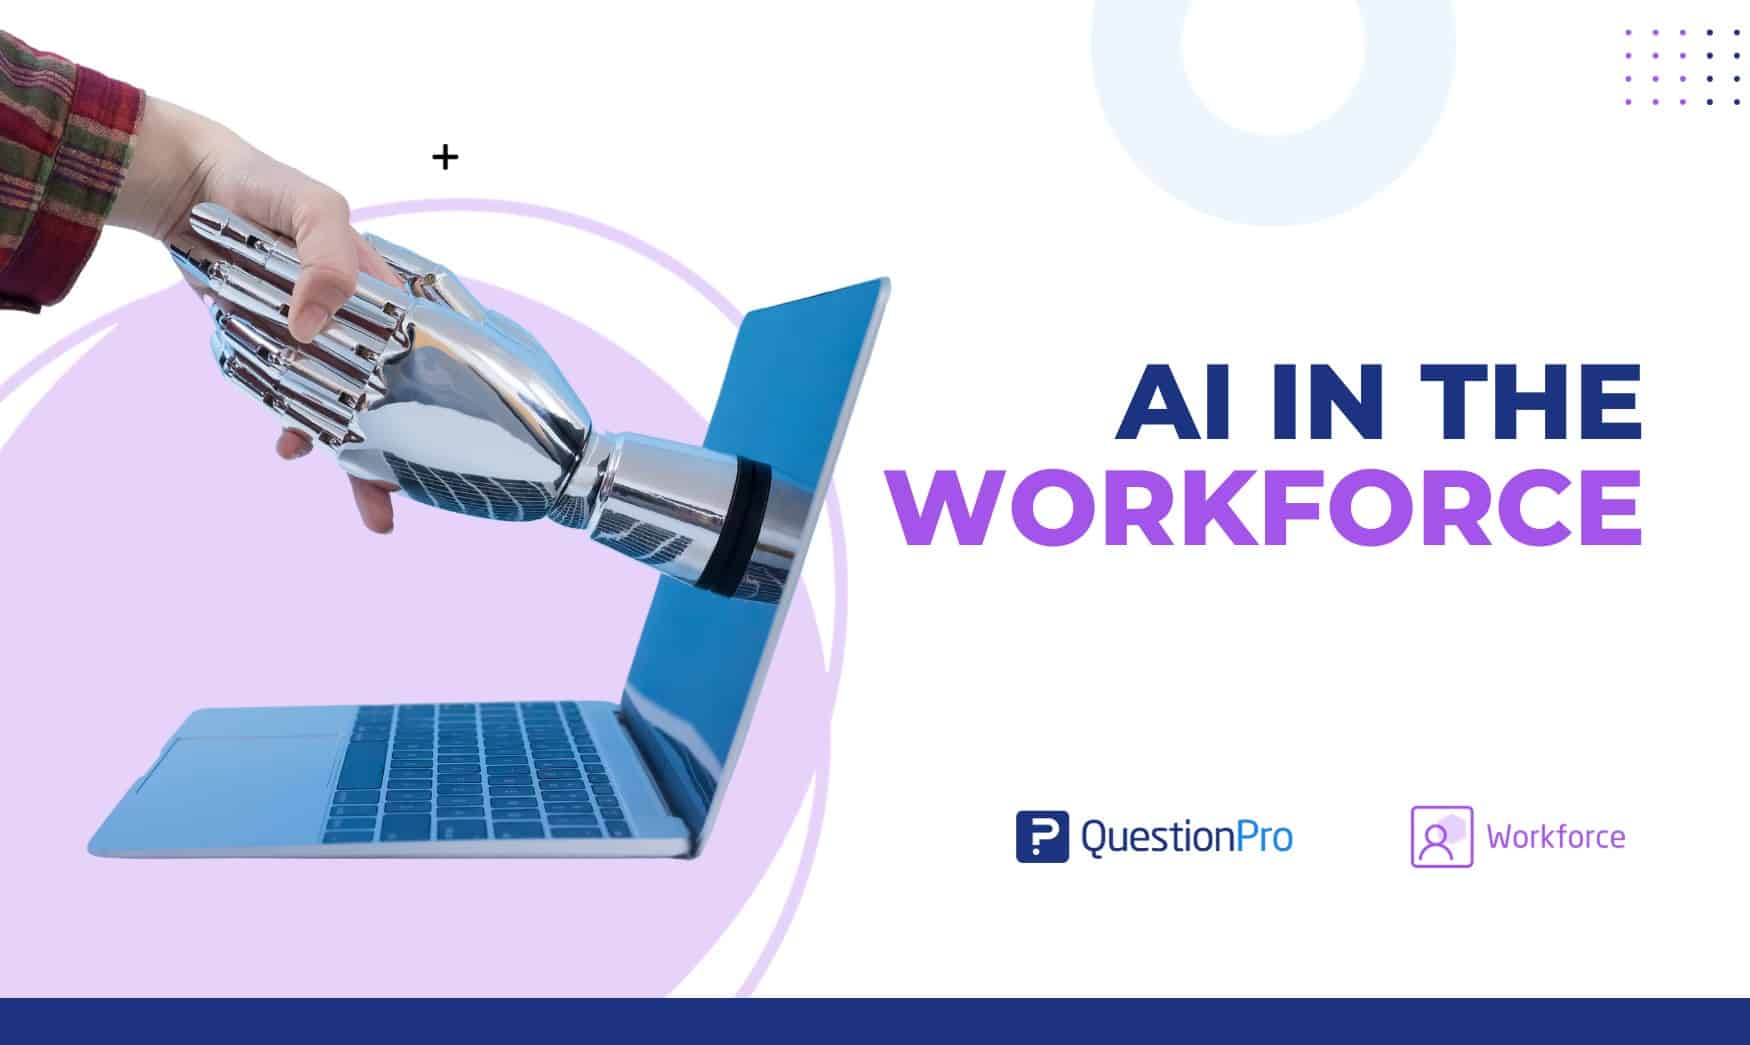 The use of AI in the workforce has been gaining ground as it has become an important tool to automate tasks and improve efficiency.